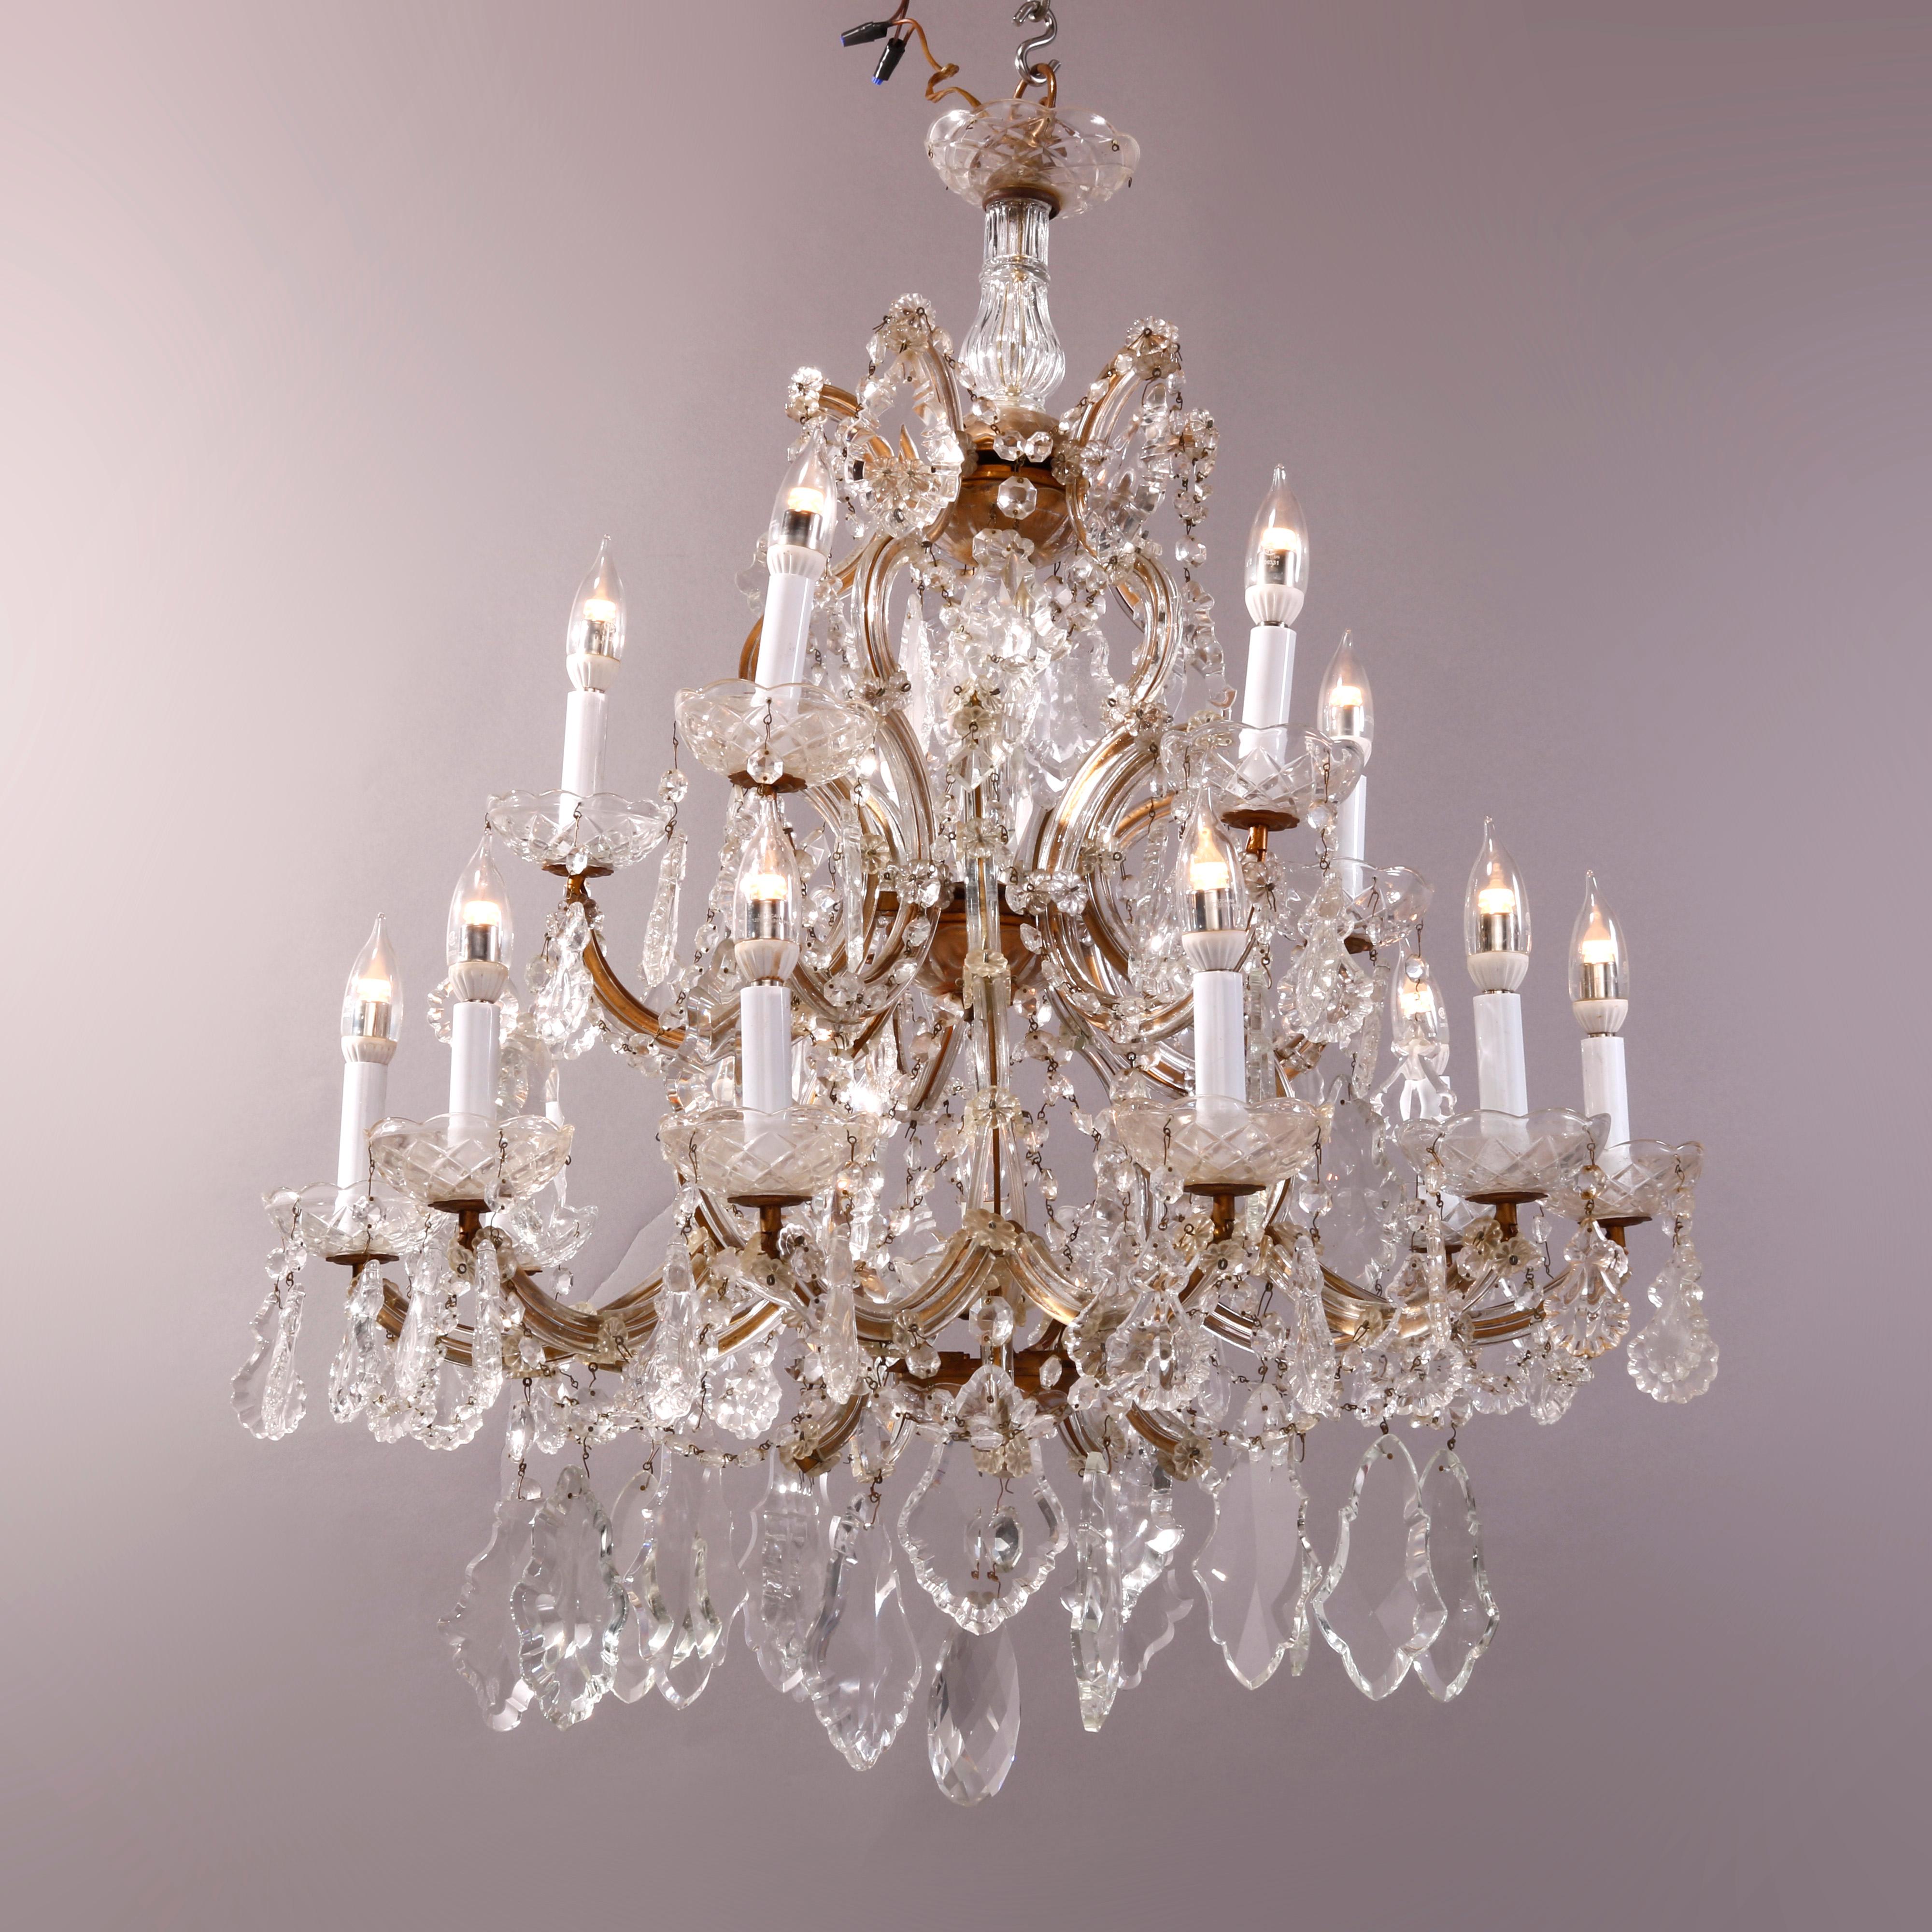 American Antique & Large Italian Crystal Tiered Sixteen-Light Chandelier circa 1930